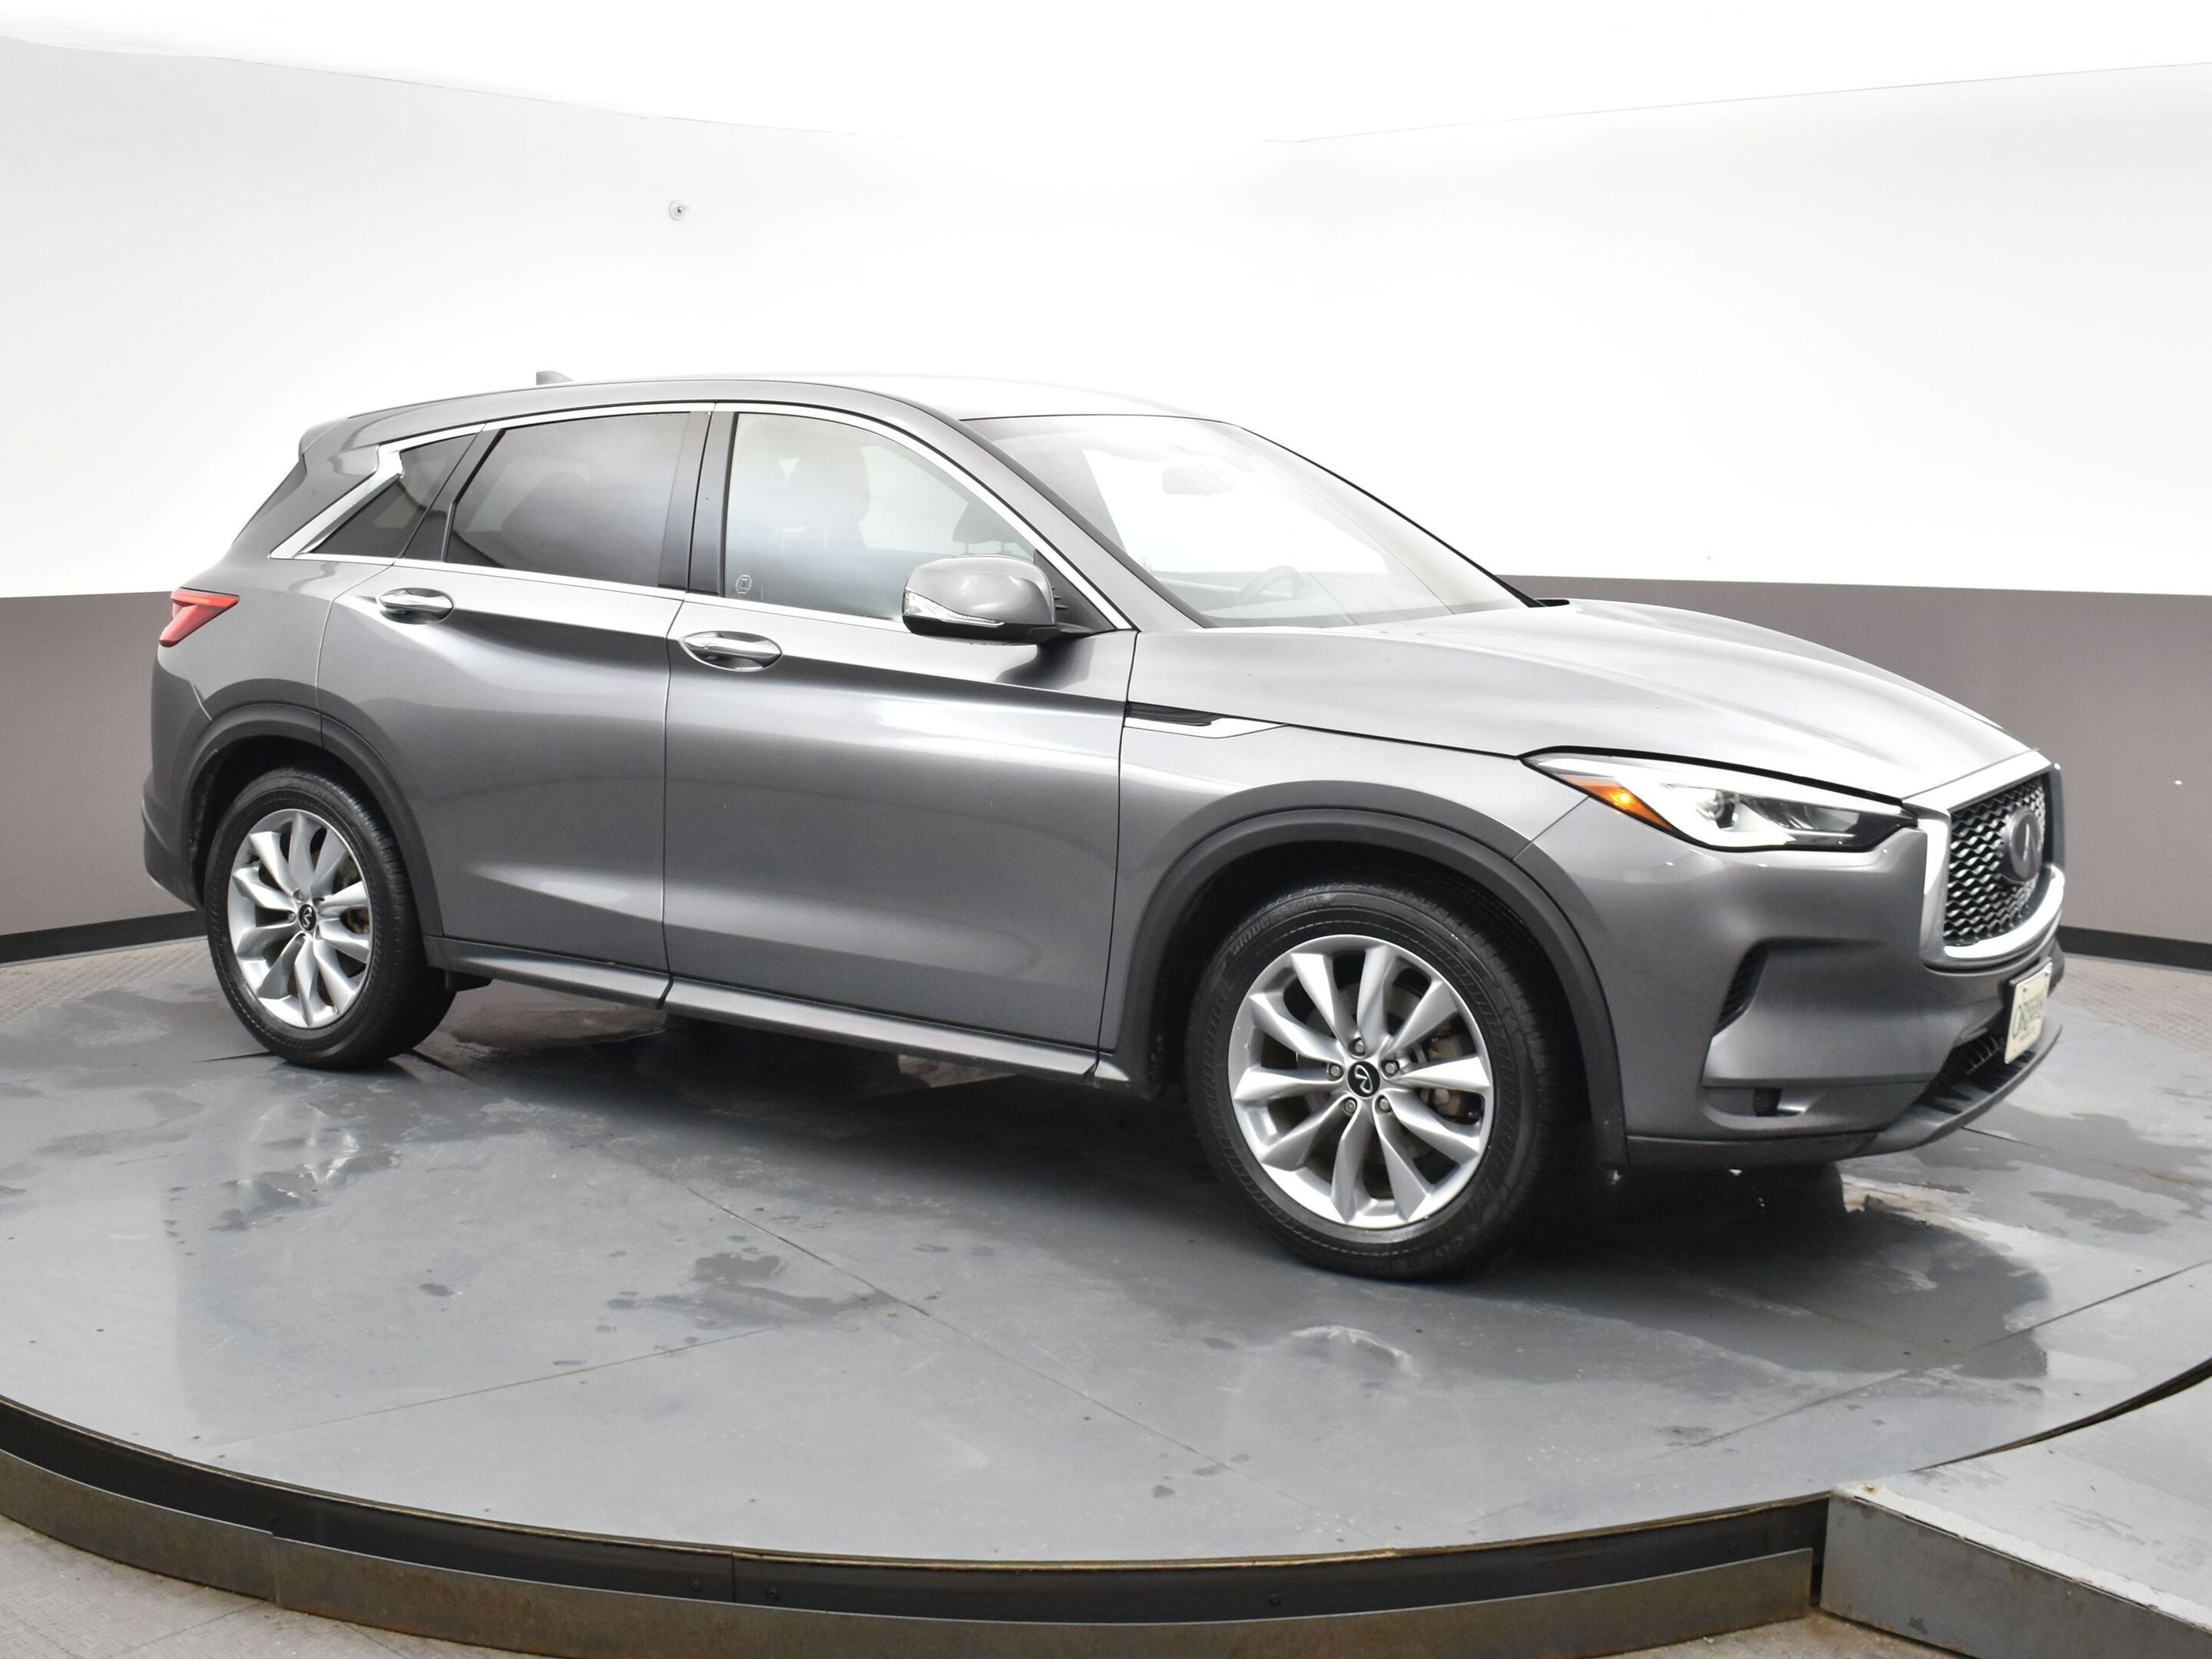 2020 Infiniti QX50 ESSENTIAL BOOK YOUR TEST DRIVE TODAY! 902-466-5775